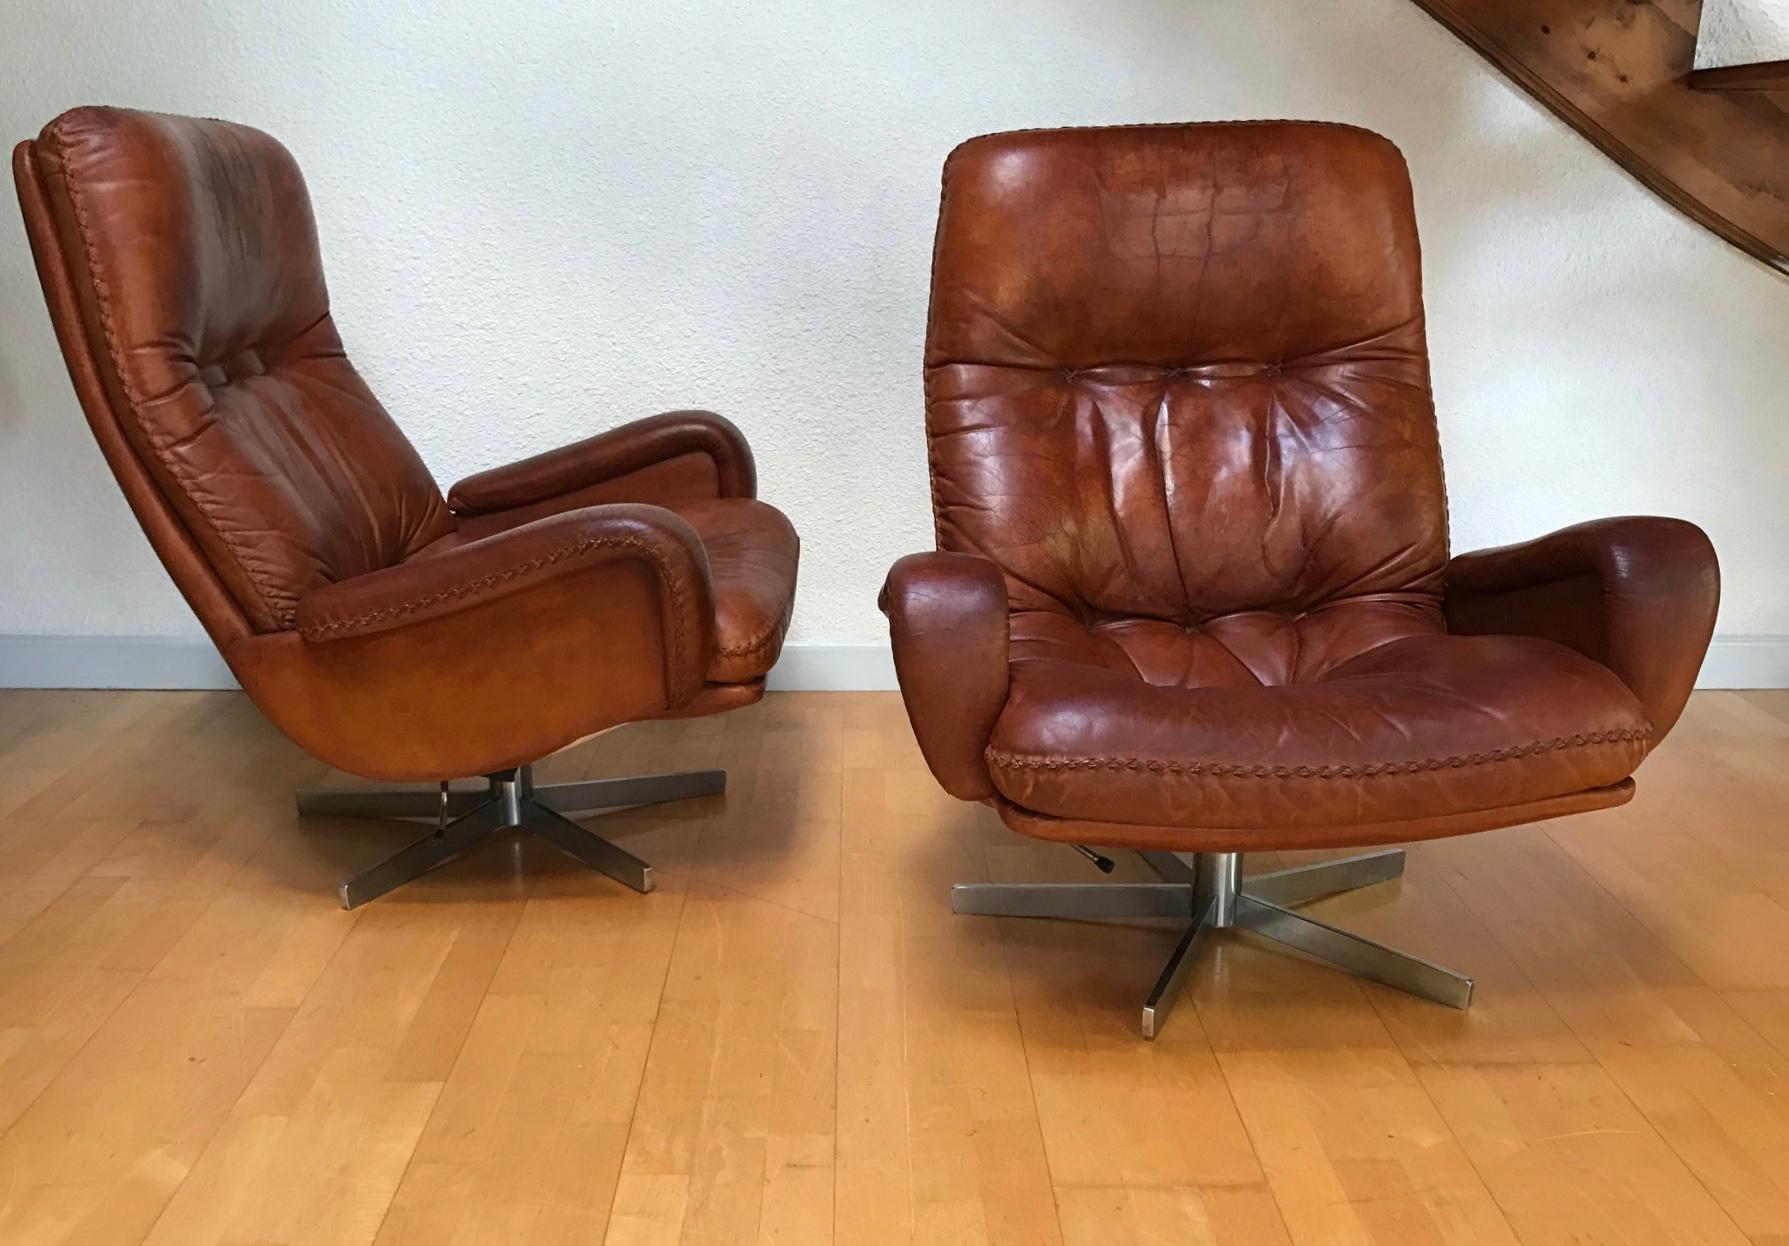 Vintage pair of swivel armchair and one ottoman S 231. by De Sede craftsman from Switzerland
This same chair was used as a prop in the 1969 James Bond film On Her Majesty's Secret Service.
Polished chrome swivel base, the lounge armchair and